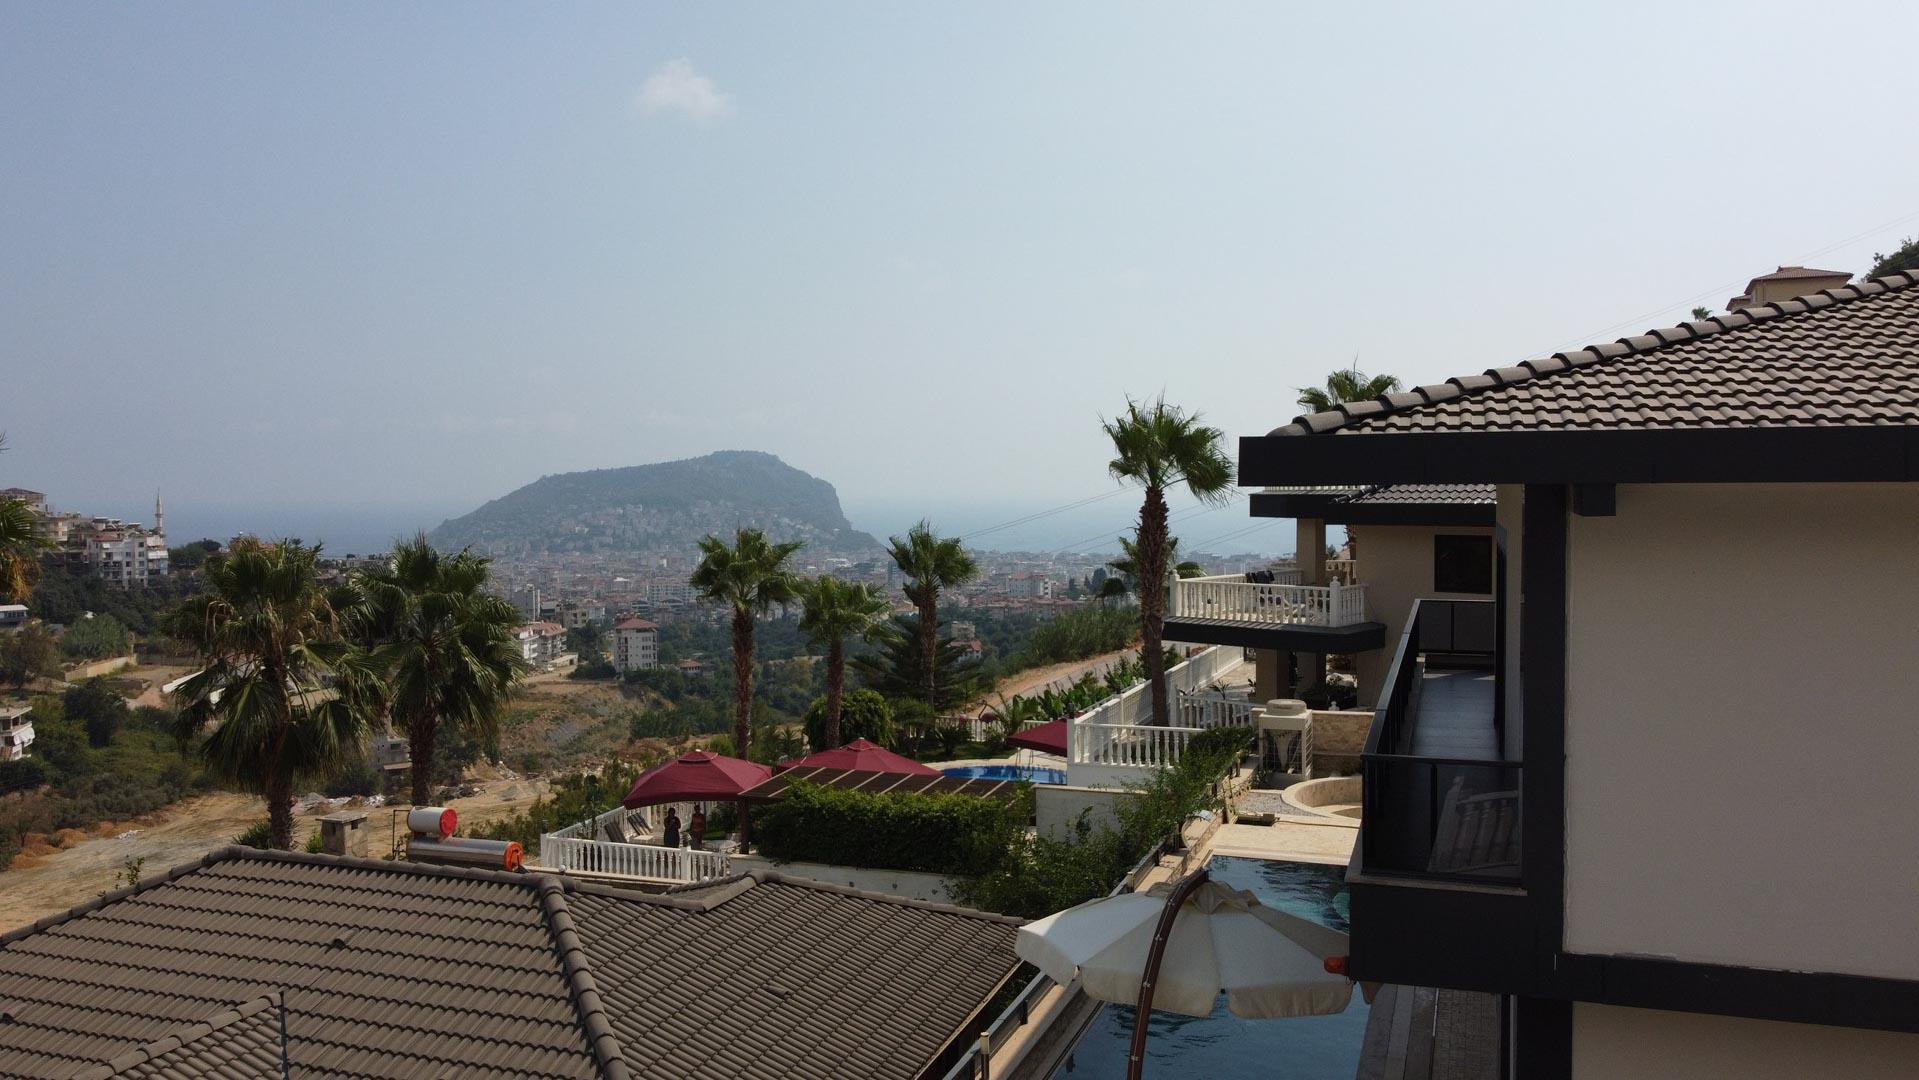 id1033-villa-11-with-vip-infrastructure-and-a-view-of-the-alanya-fortress-25.jpg